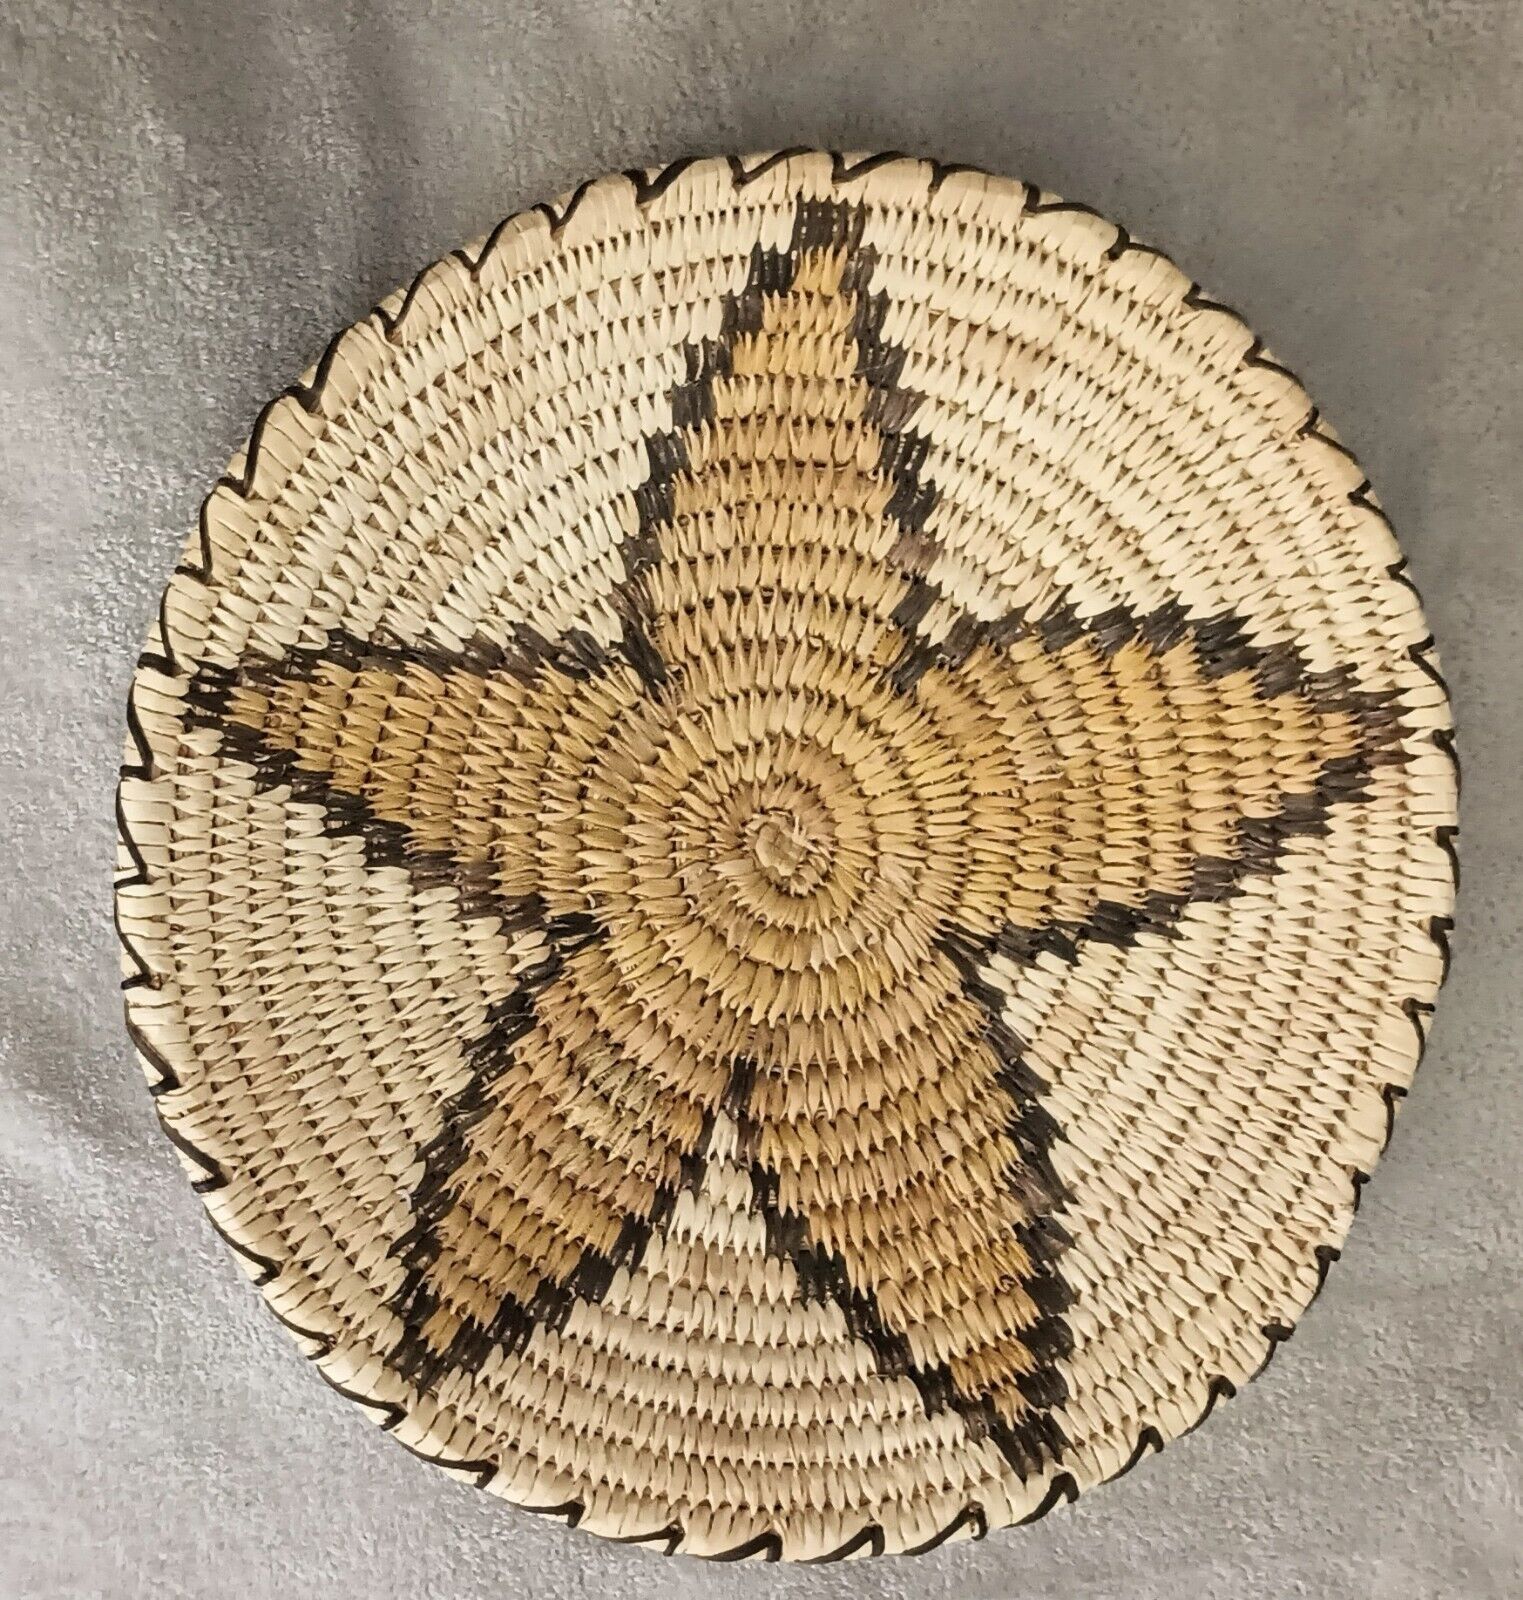 Authentic Antique Handmade Native American Serving Plate from AZ / TX Territory